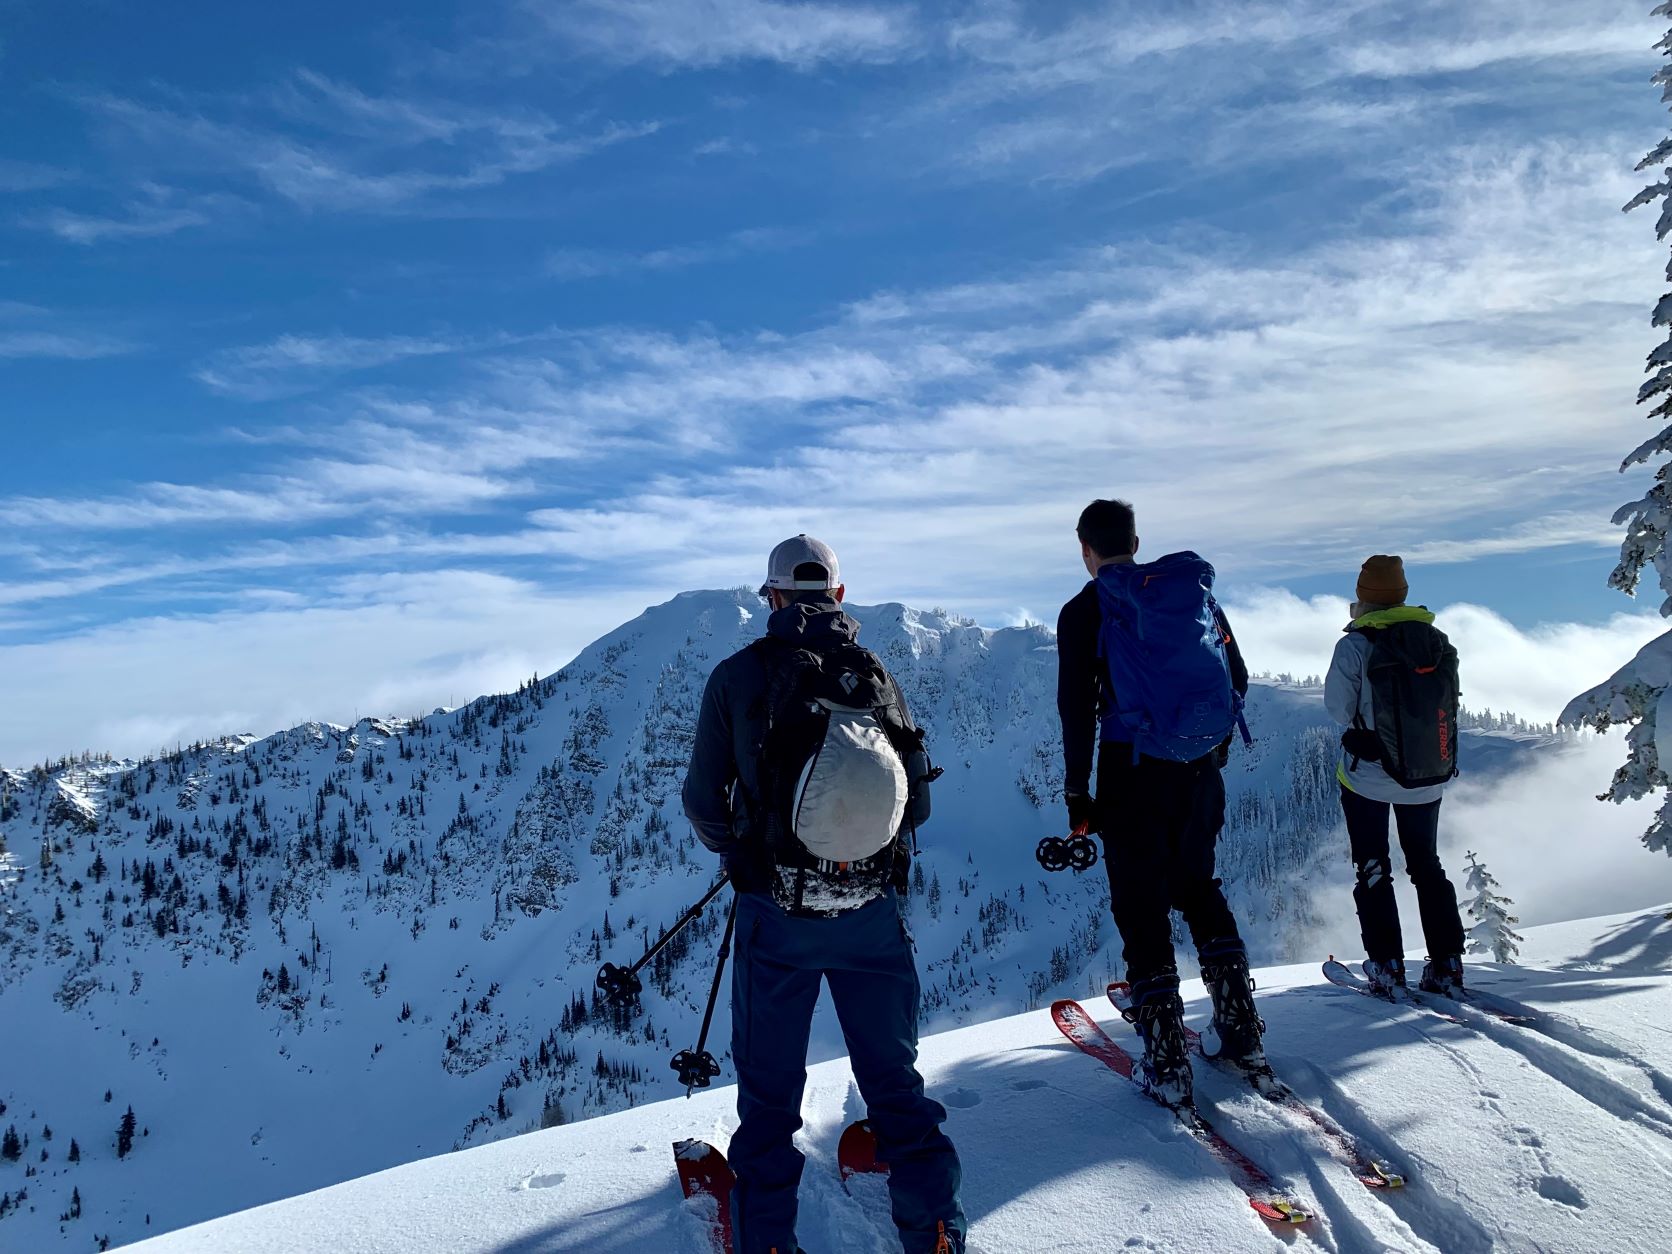 Three backcountry skiers, backs to the camera, looking over the edge, preparing to ski down, with a snowy ridge line farther beyond.